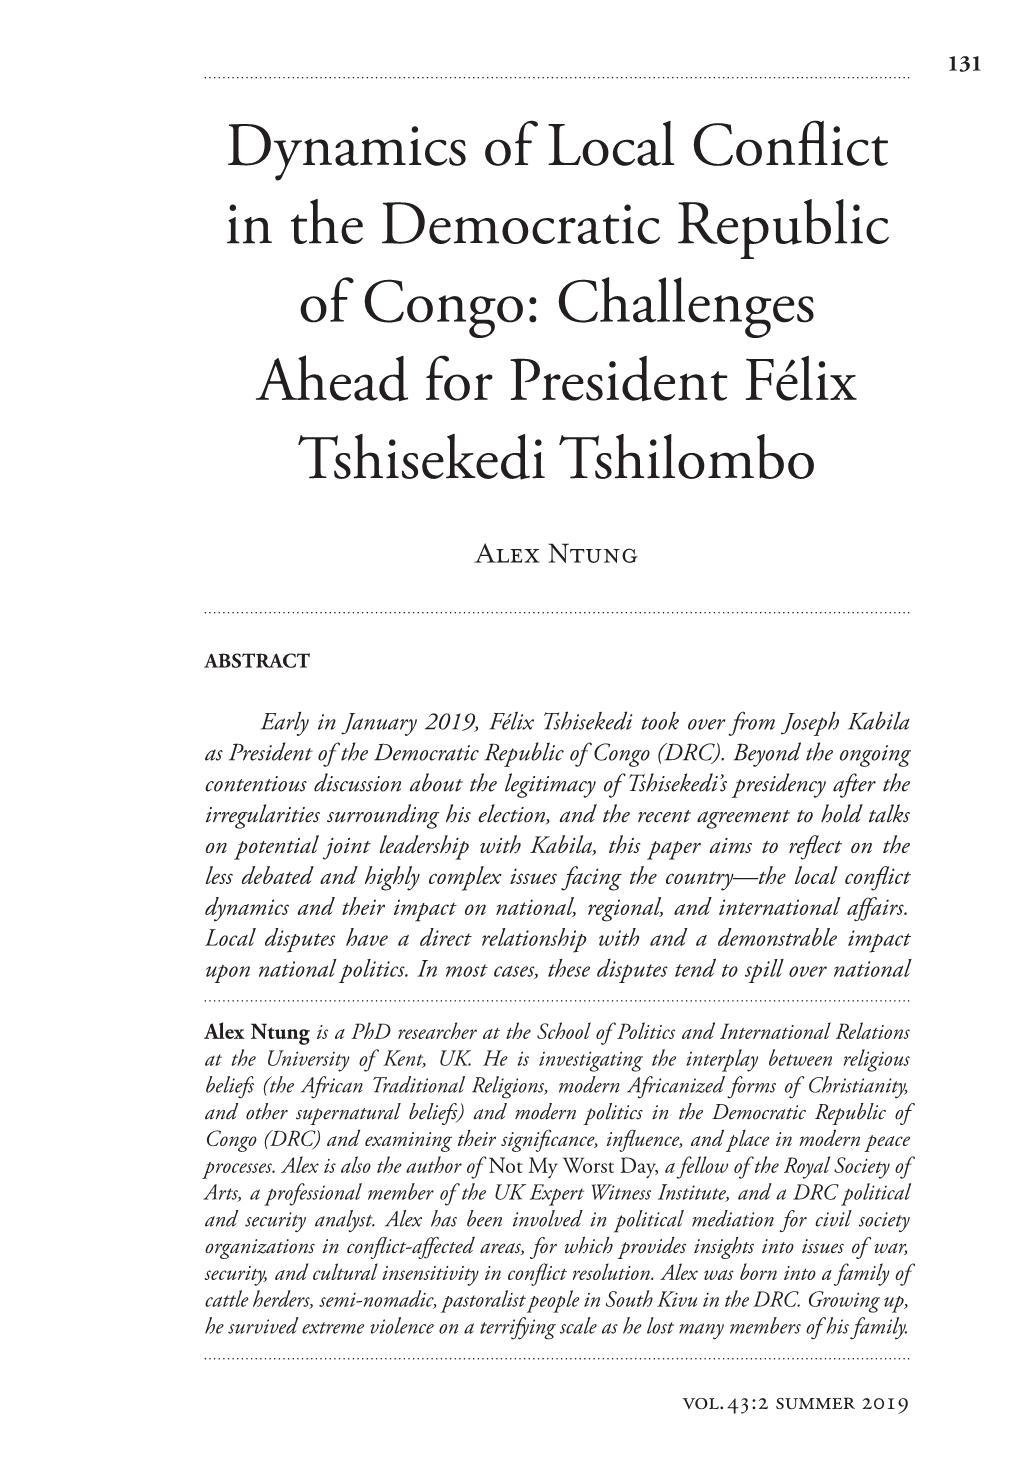 Dynamics of Local Conflict in the Democratic Republic of Congo: Challenges Ahead for President Félix Tshisekedi Tshilombo